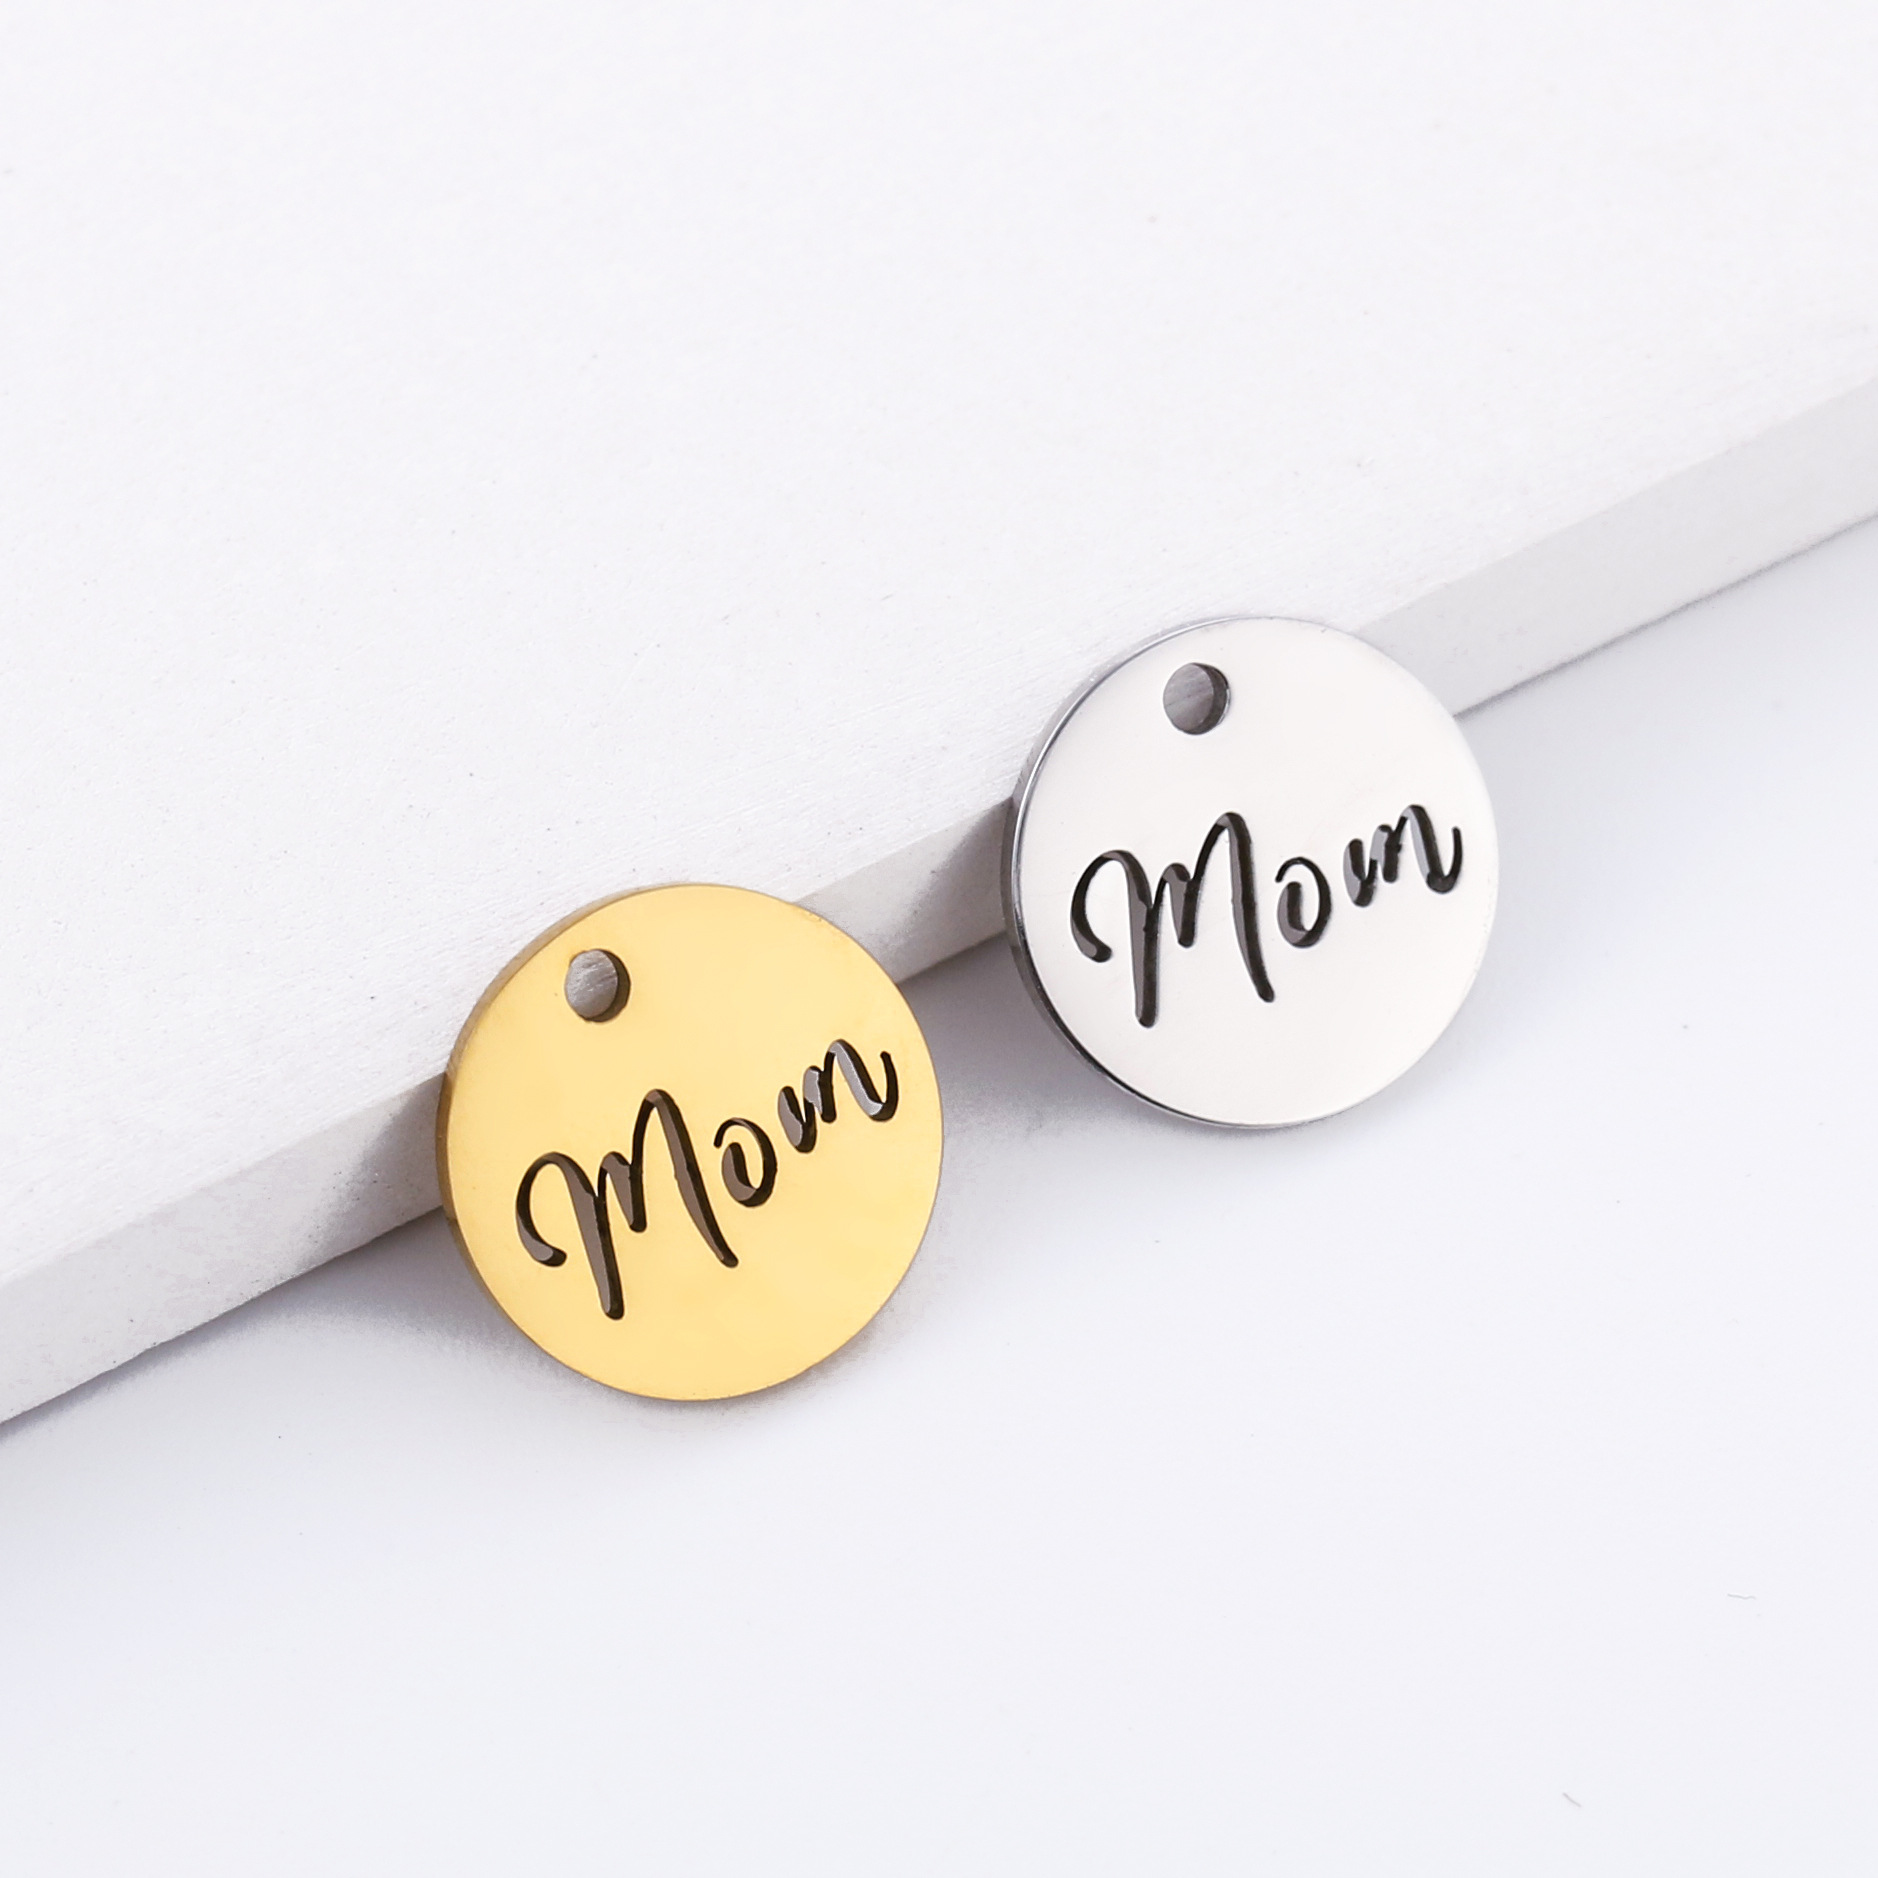 New stainless steel mirror round hollow mom letter small pendant diy Mother's Day gift mom jewelry accessories